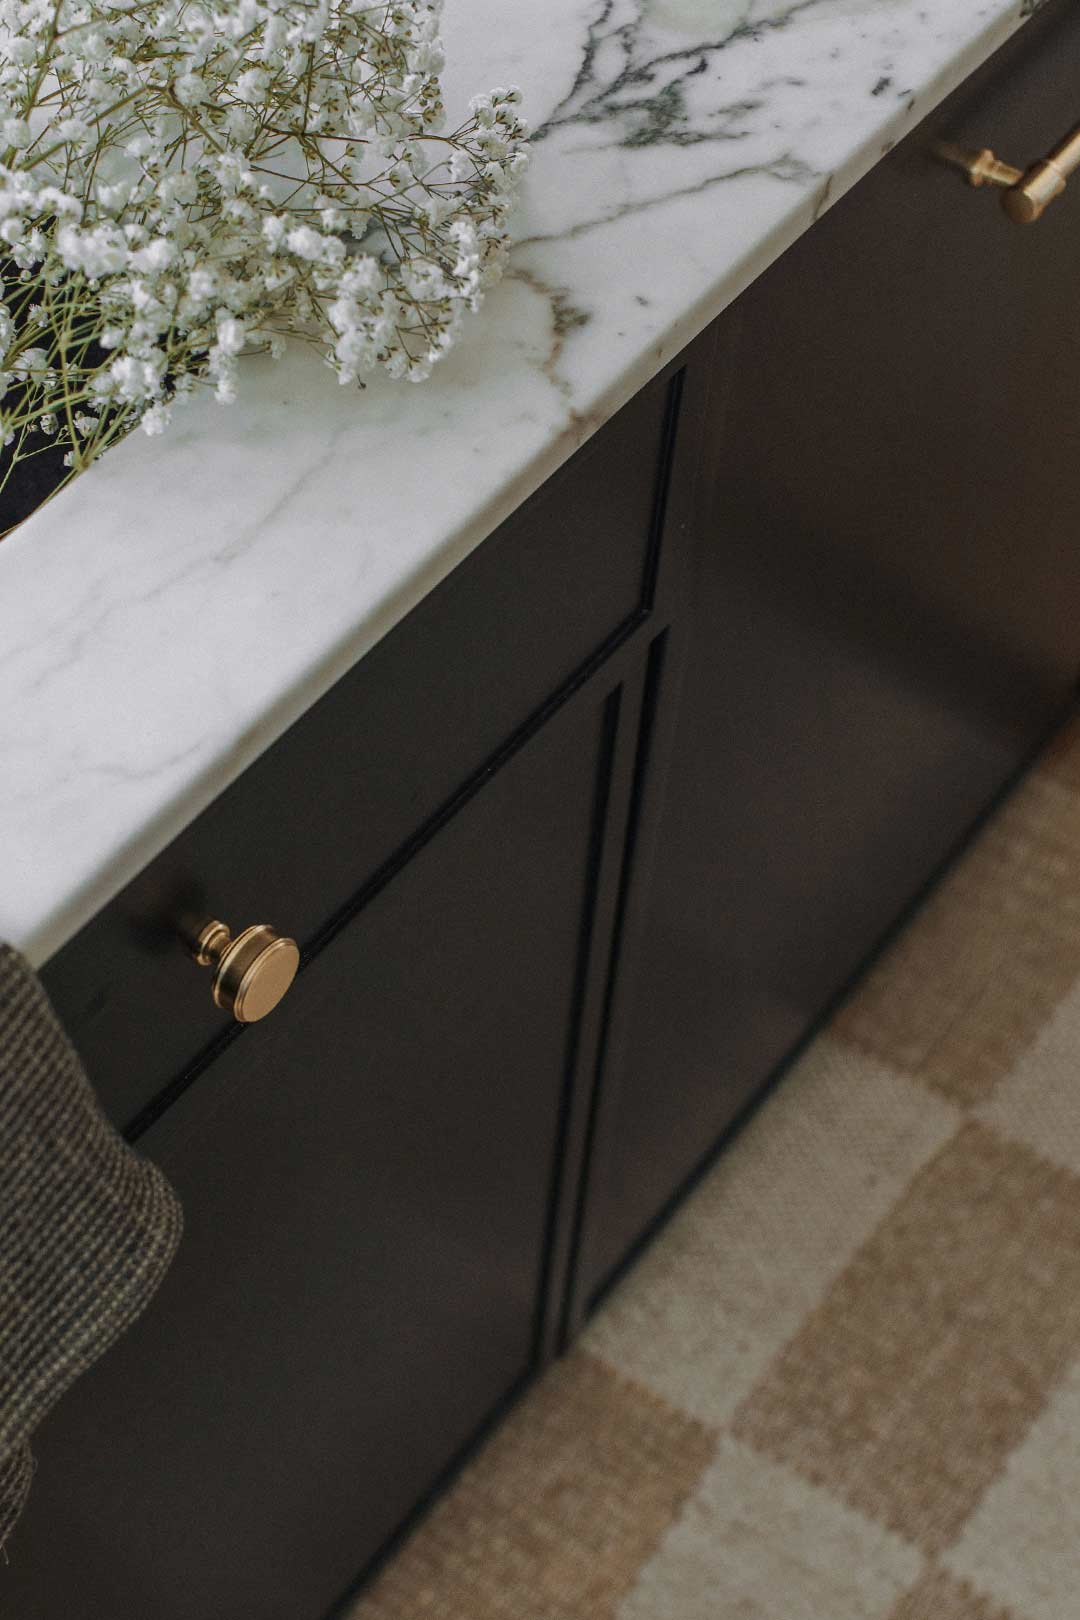 Top down view of marble countertop and organic-modern rug and styling by Jennifer Murphy of J. Reiko Design + Co